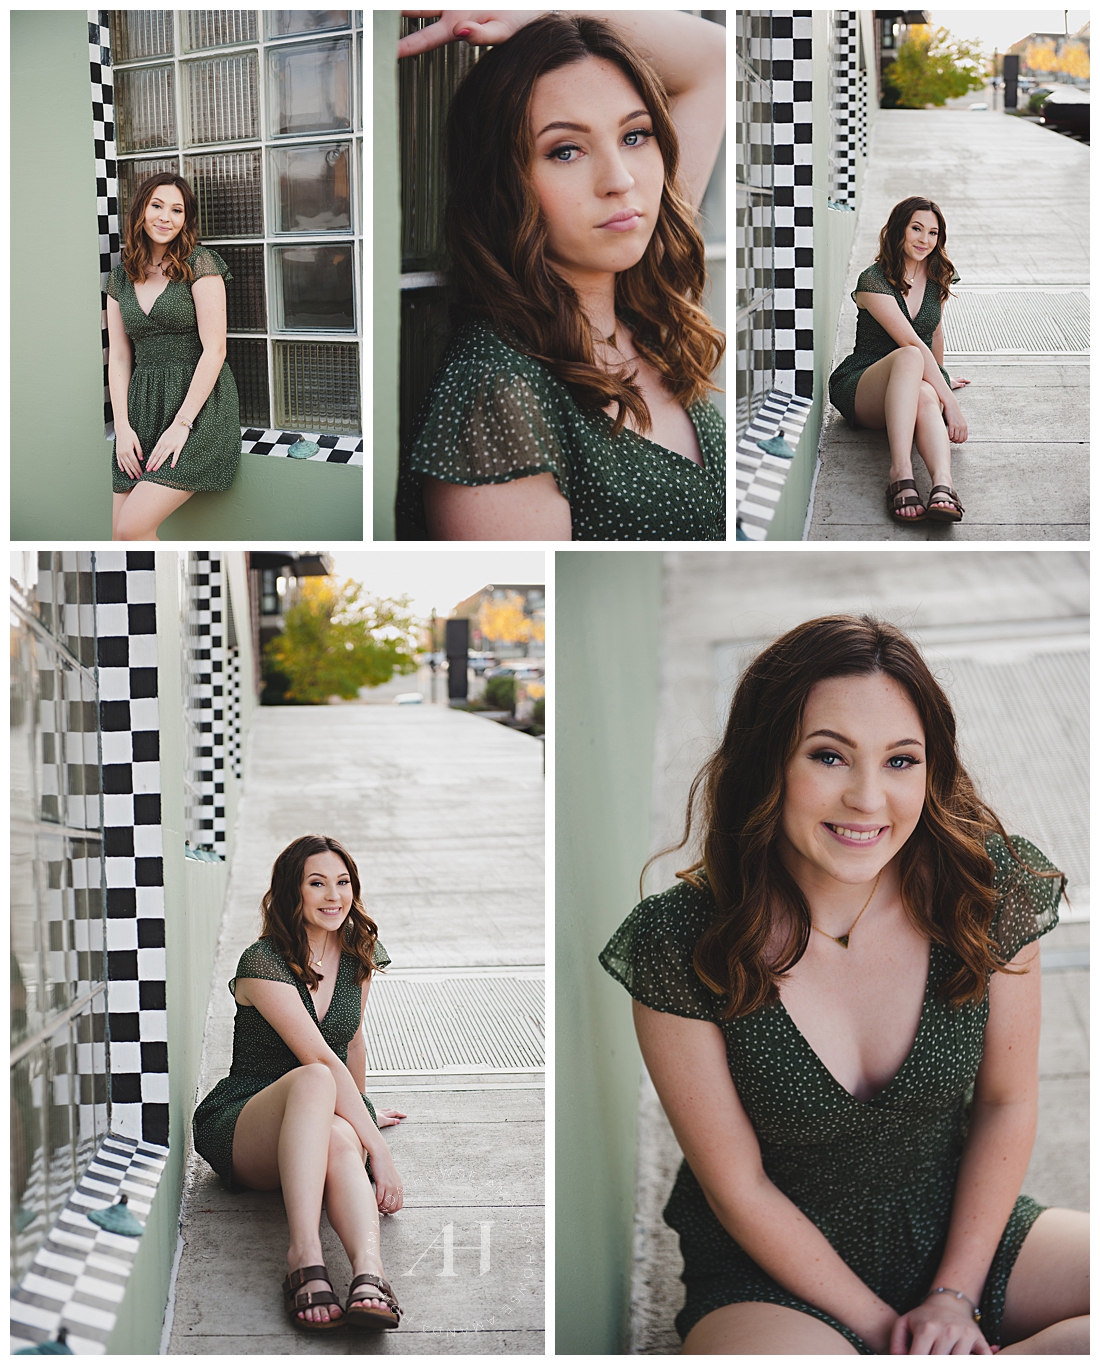 Cute Senior Portraits in a Green Dress | Style Inspo for High School Seniors, Pose Ideas for Senior Girls, Downtown Tacoma Portraits | Photographed by the Best Tacoma Senior Photographer Amanda Howse